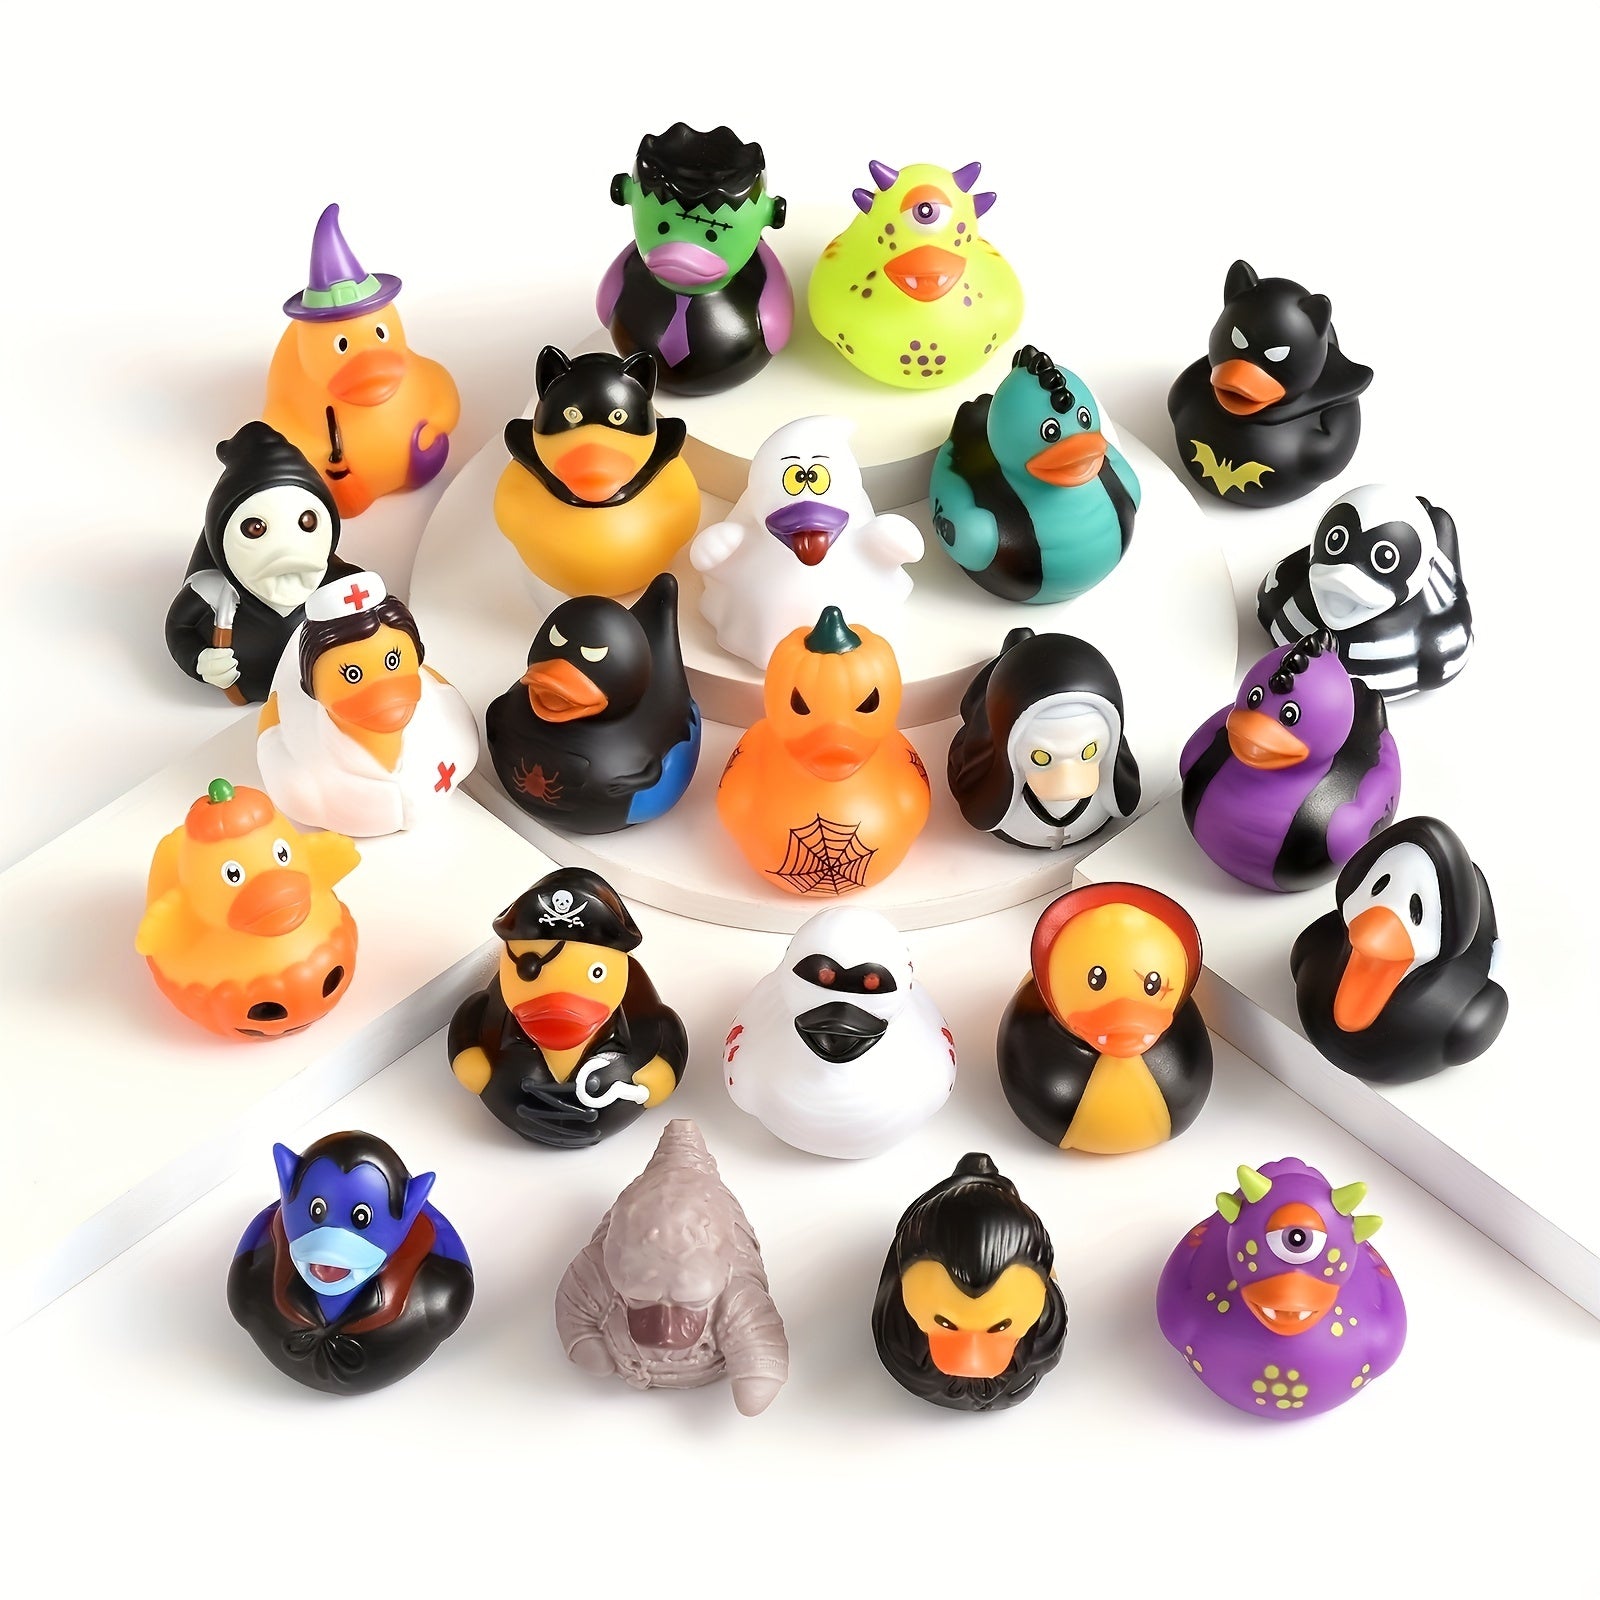 24pcs, Halloween Party Favors Rubber Ducks, Bath Toys Assorted Duckies (2"), Kids Halloween Decor Supplies, Trick Or Treat Supplies, Goodie Bag Fillers Baby Showers Halloween Party Supplies - Cykapu